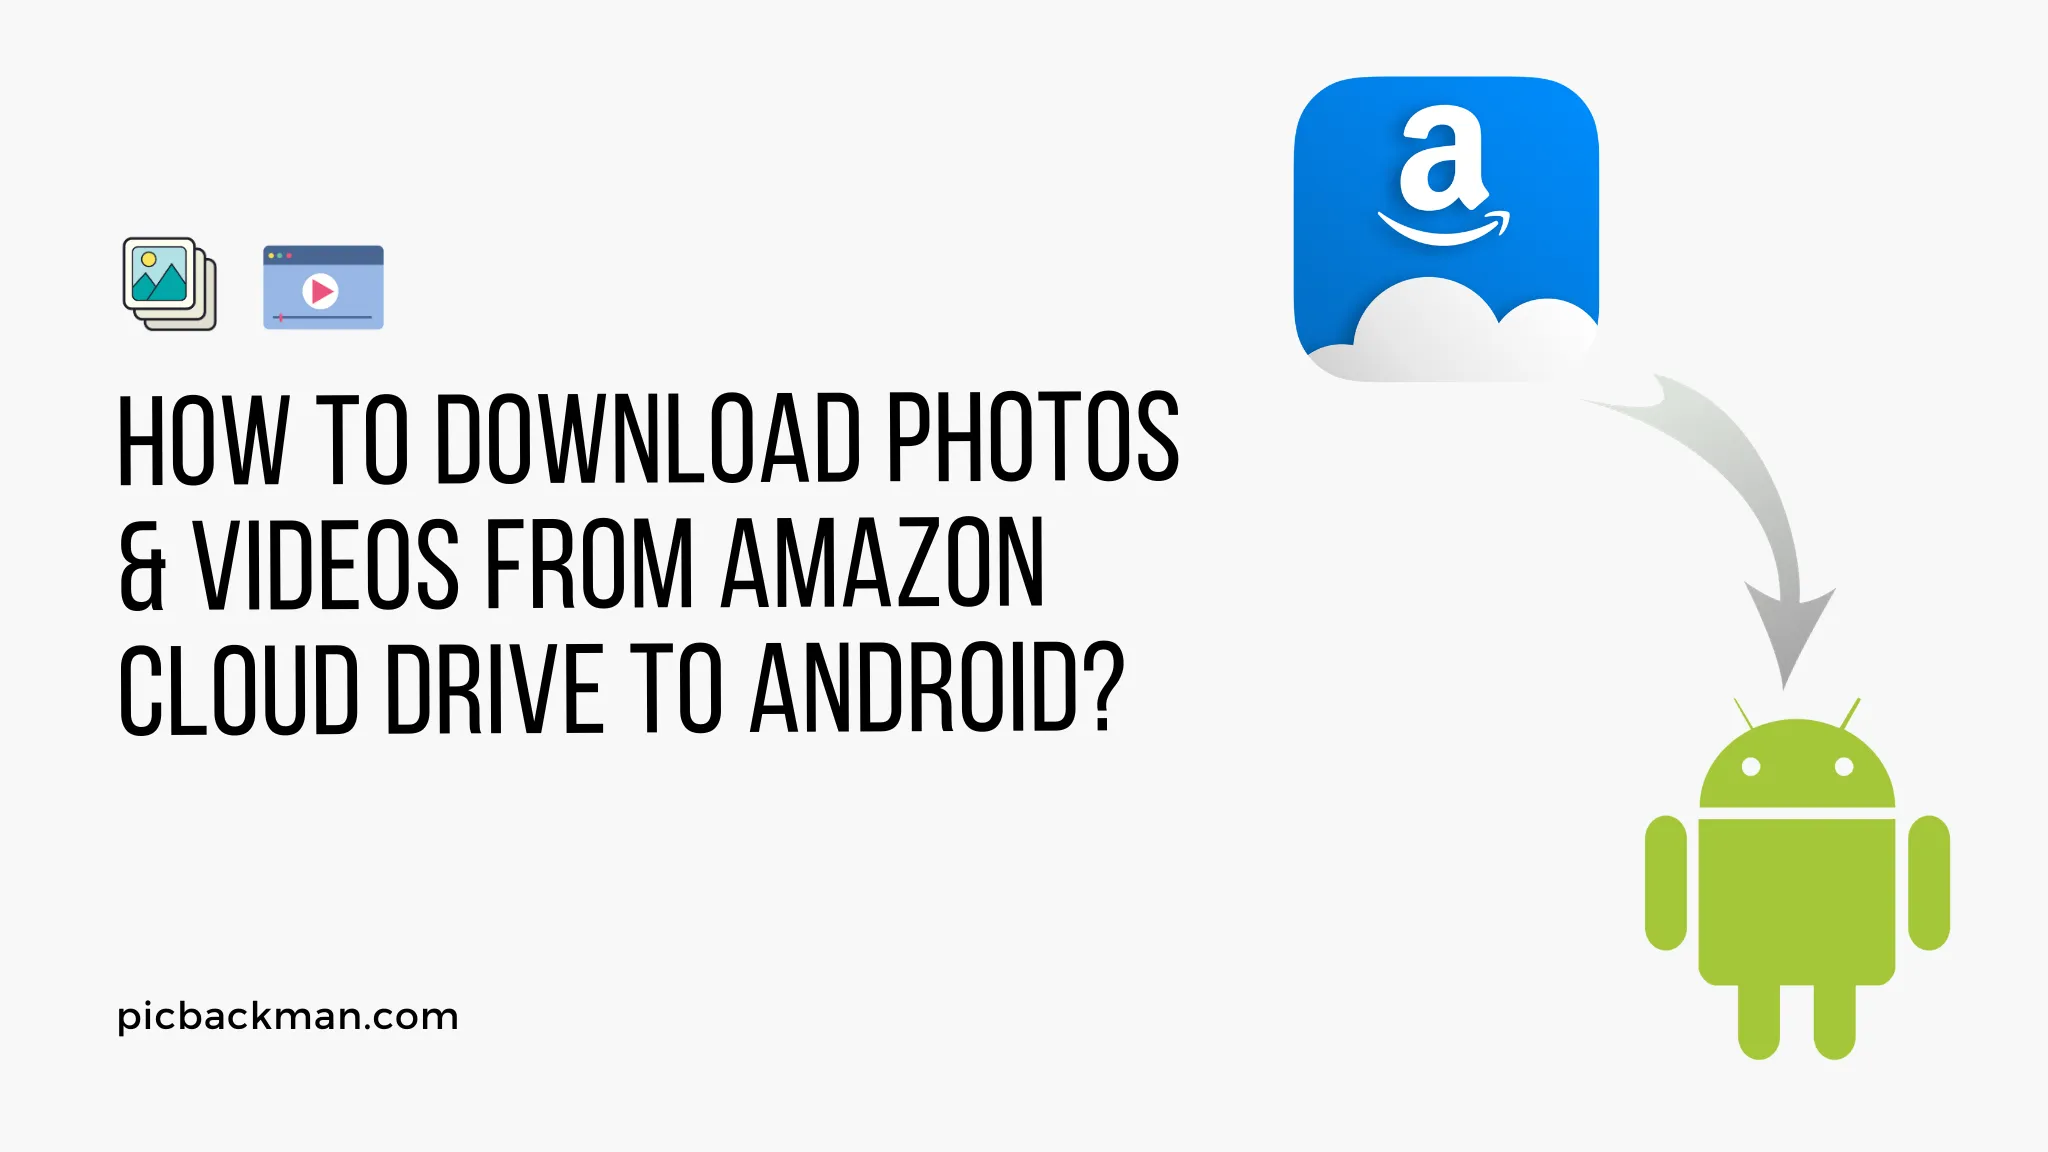 How to Download Photos and Videos from Amazon Cloud Drive to Android?